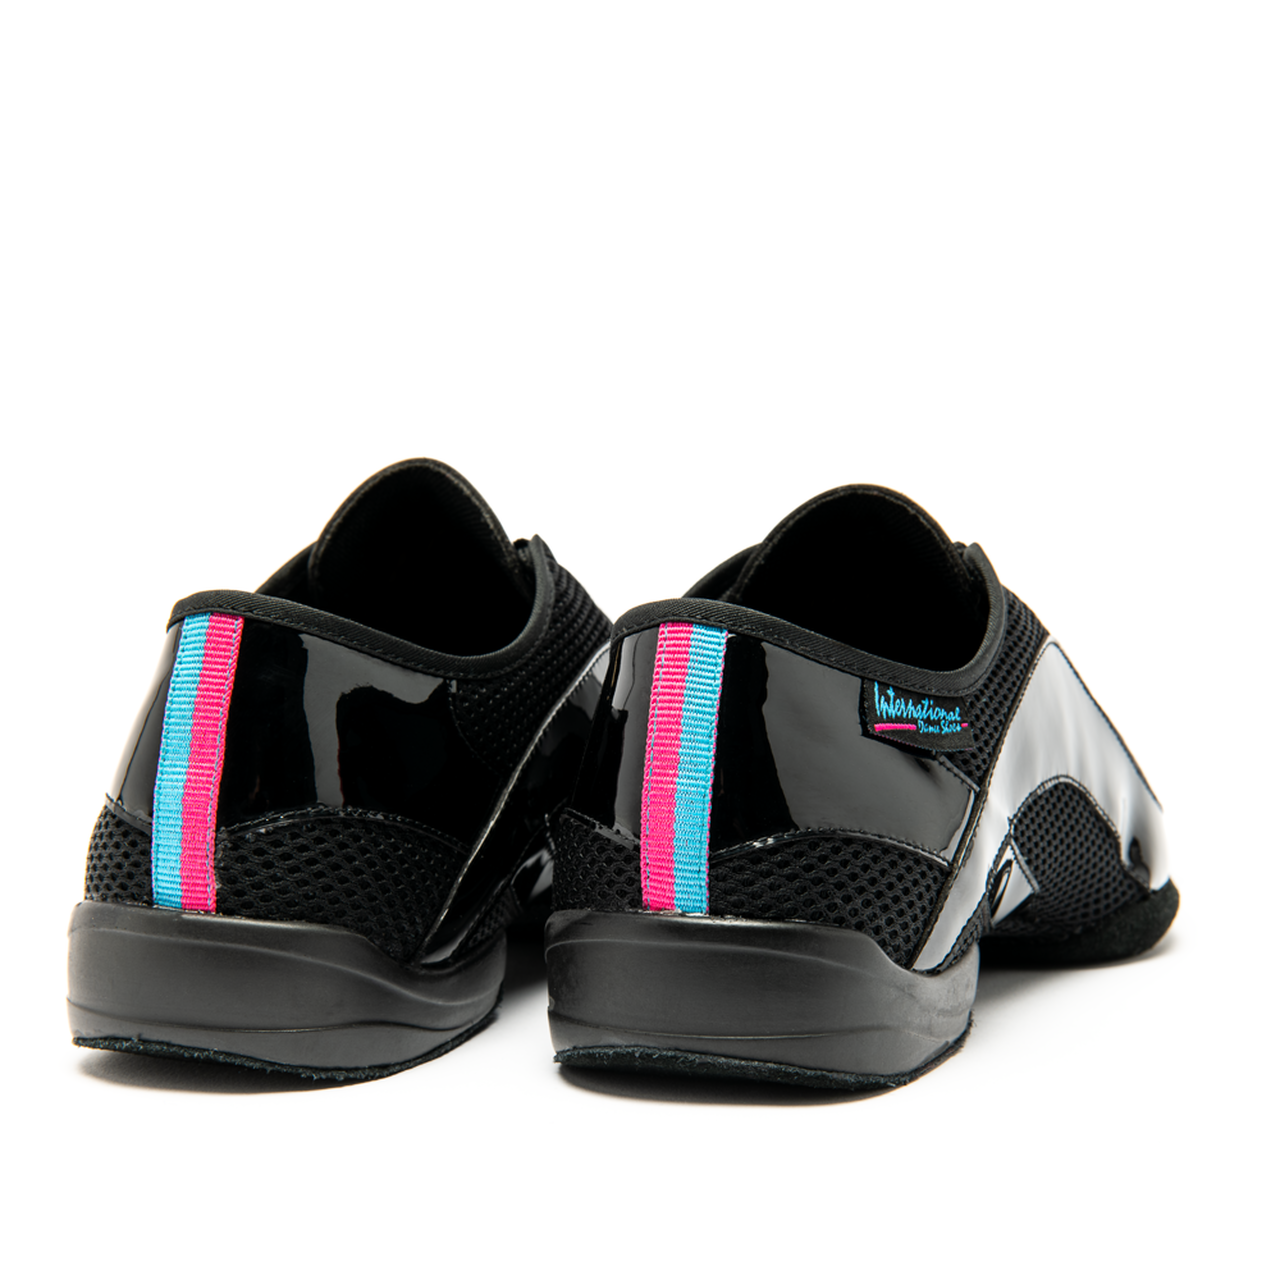 International Dance Shoes IDS Tempo Teaching/Practice Shoe in AirMesh/Black Patent in Stock